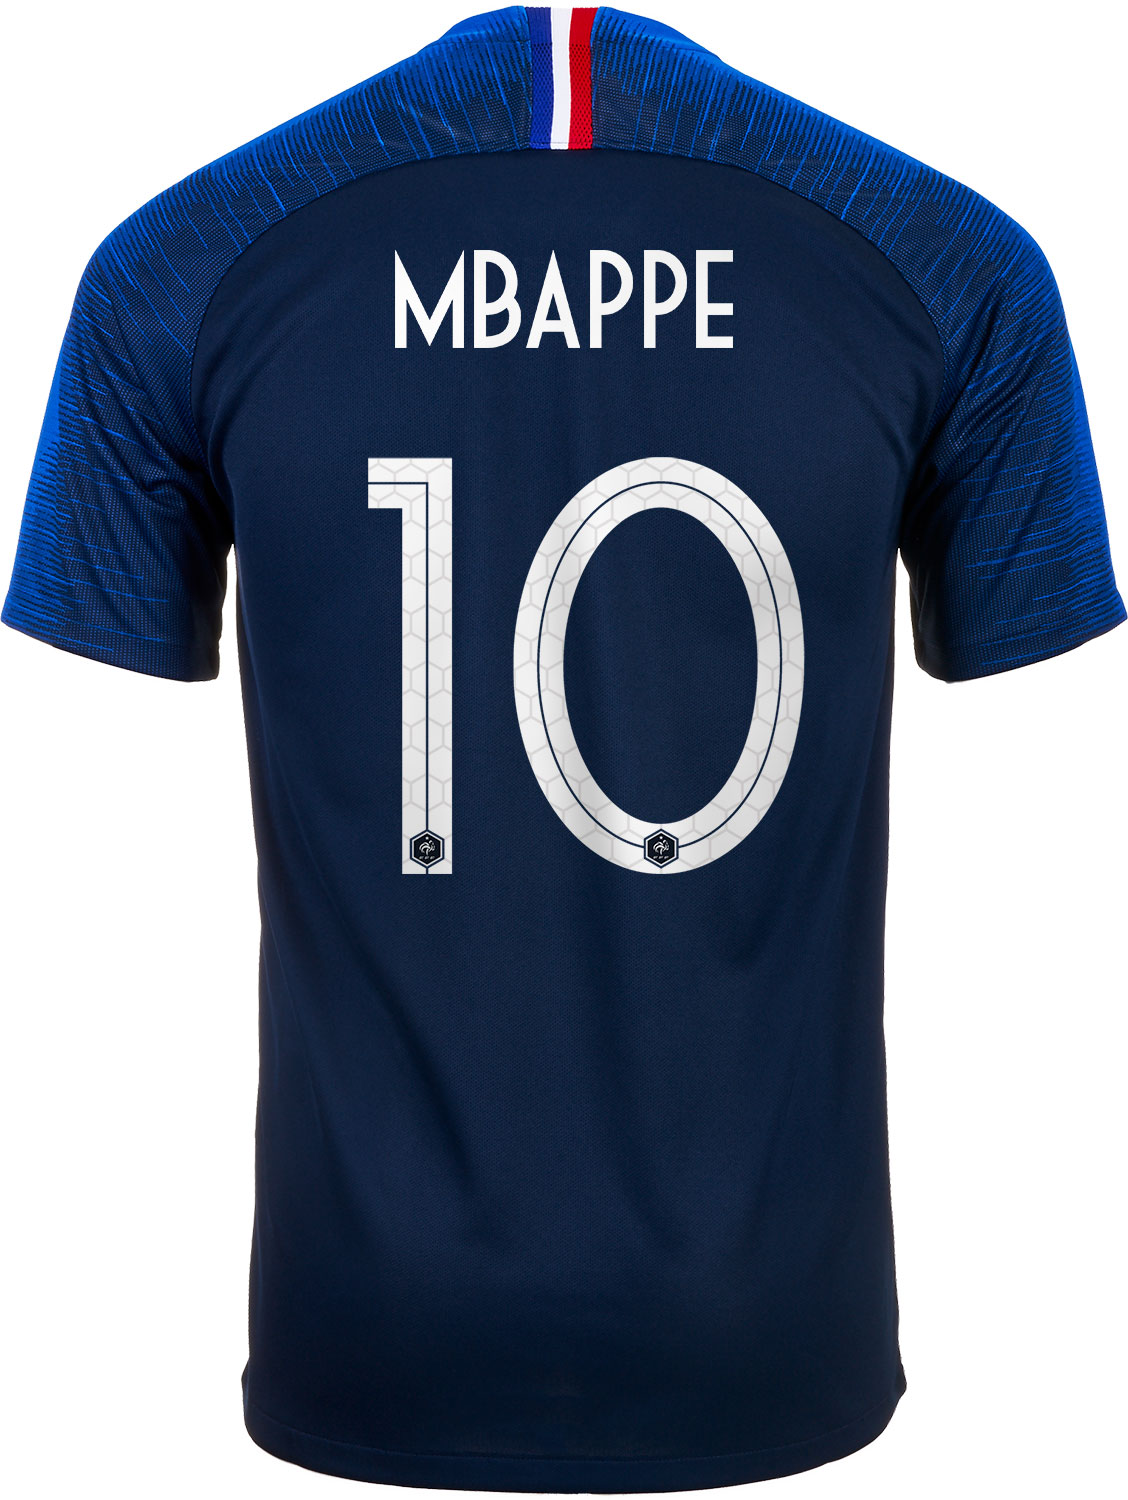 mbappe official jersey